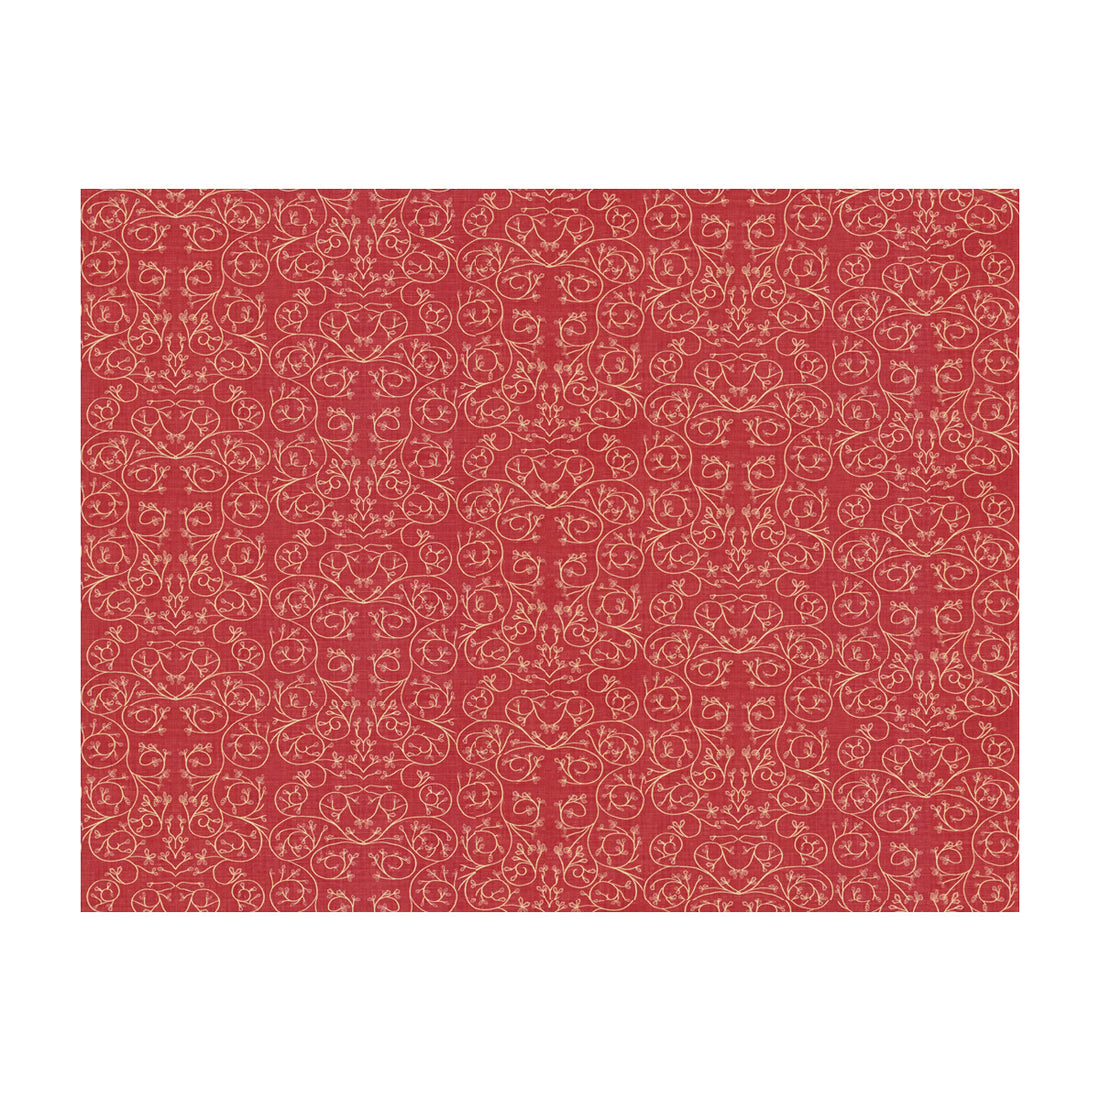 Garden Reverse fabric in cerise color - pattern GWF-3512.7.0 - by Lee Jofa Modern in the Allegra Hicks Garden collection